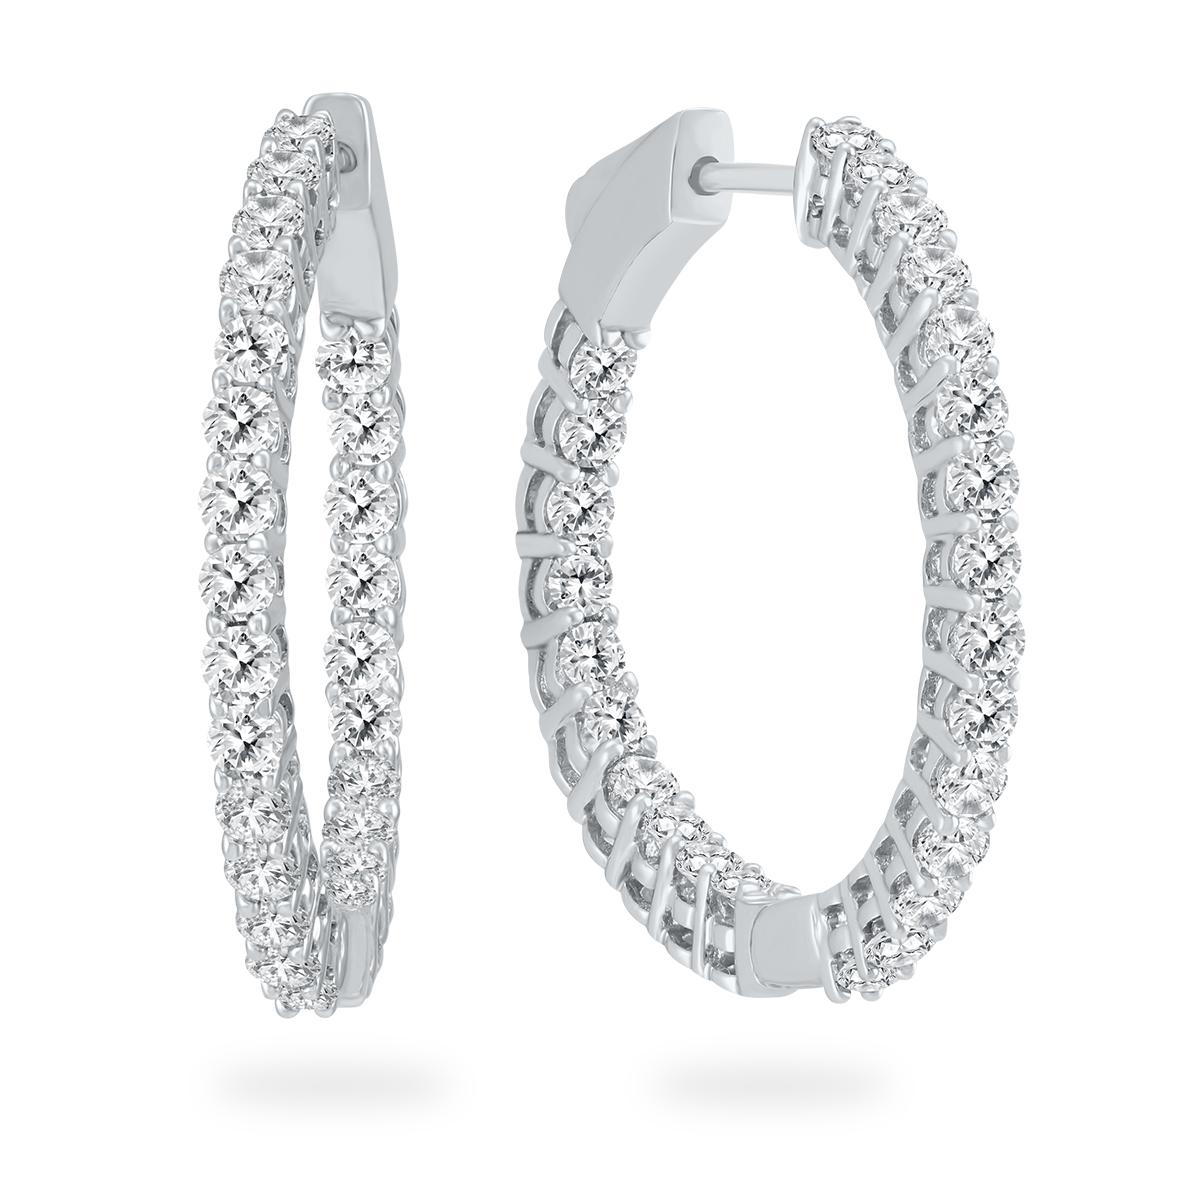 14K White Gold Diamond Earrings featuring 2.00 Carat T.W. of Natural Diamonds

Underline your look with this sharp 14K White Gold Diamond Earrings. High quality Diamonds. This Earrings will underline your exquisite look for any occasion.

. is a